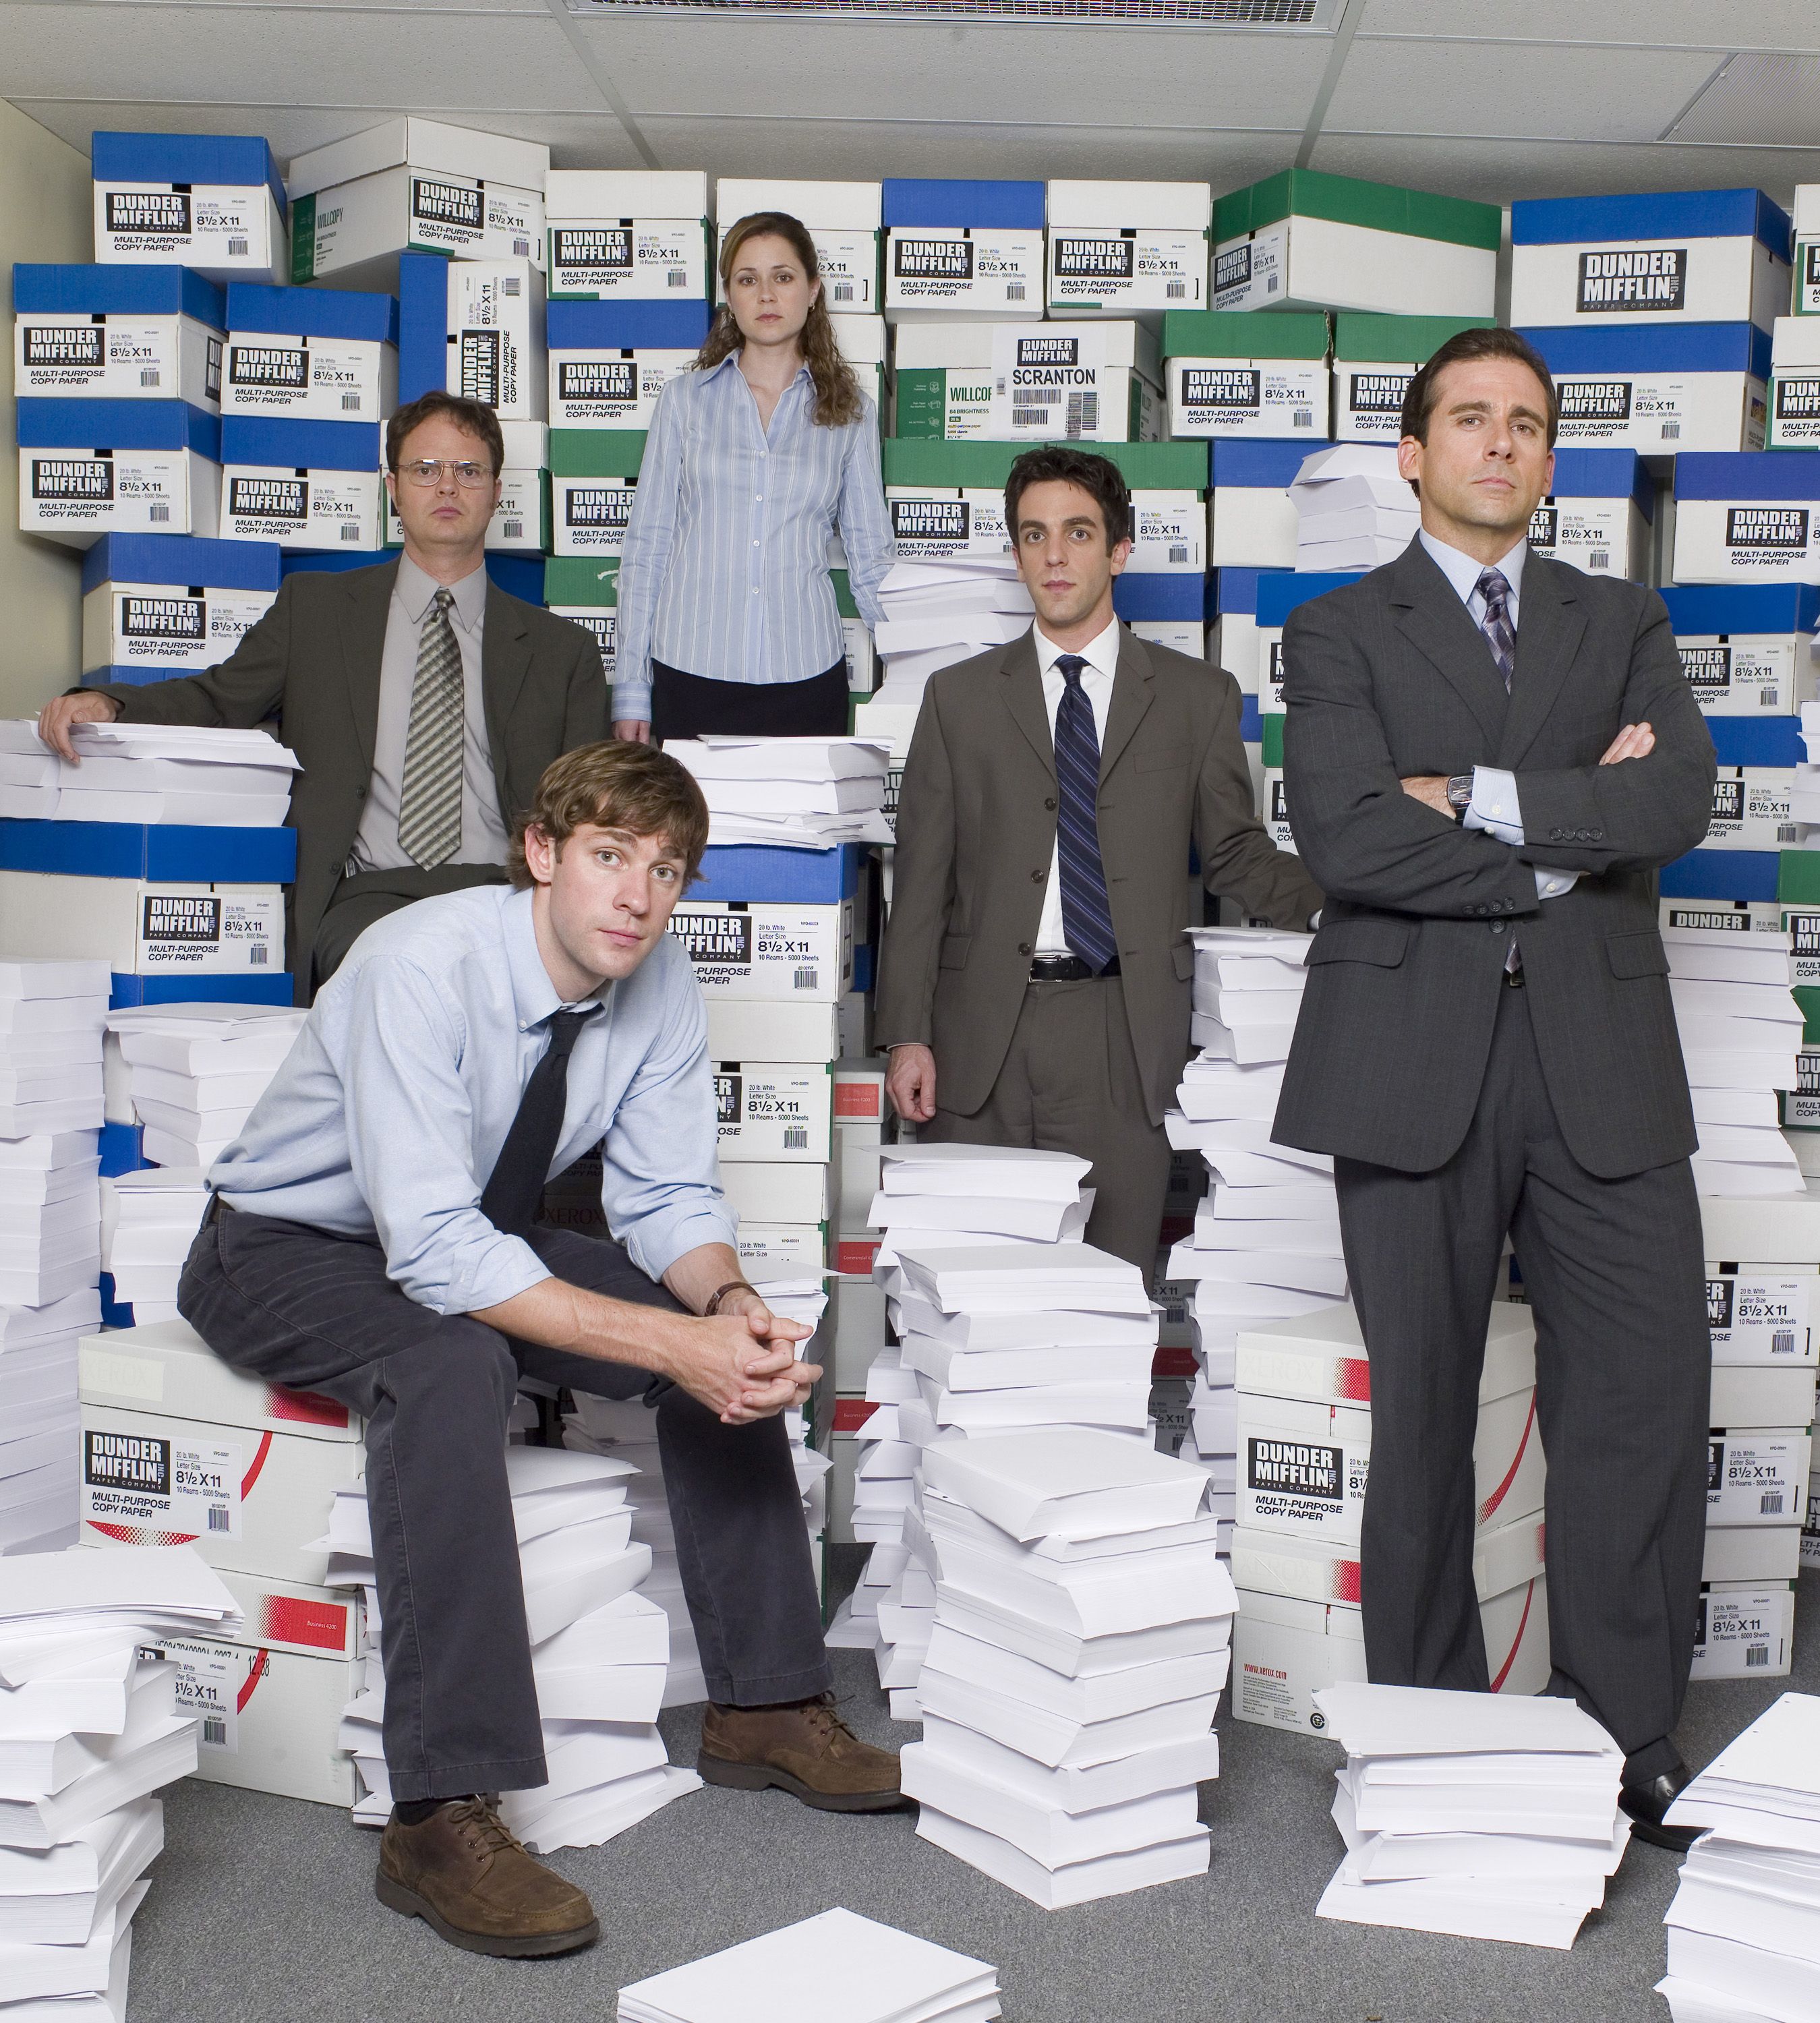 100 Best Quotes From 'The Office' - Most Iconic 'Office' Quotes